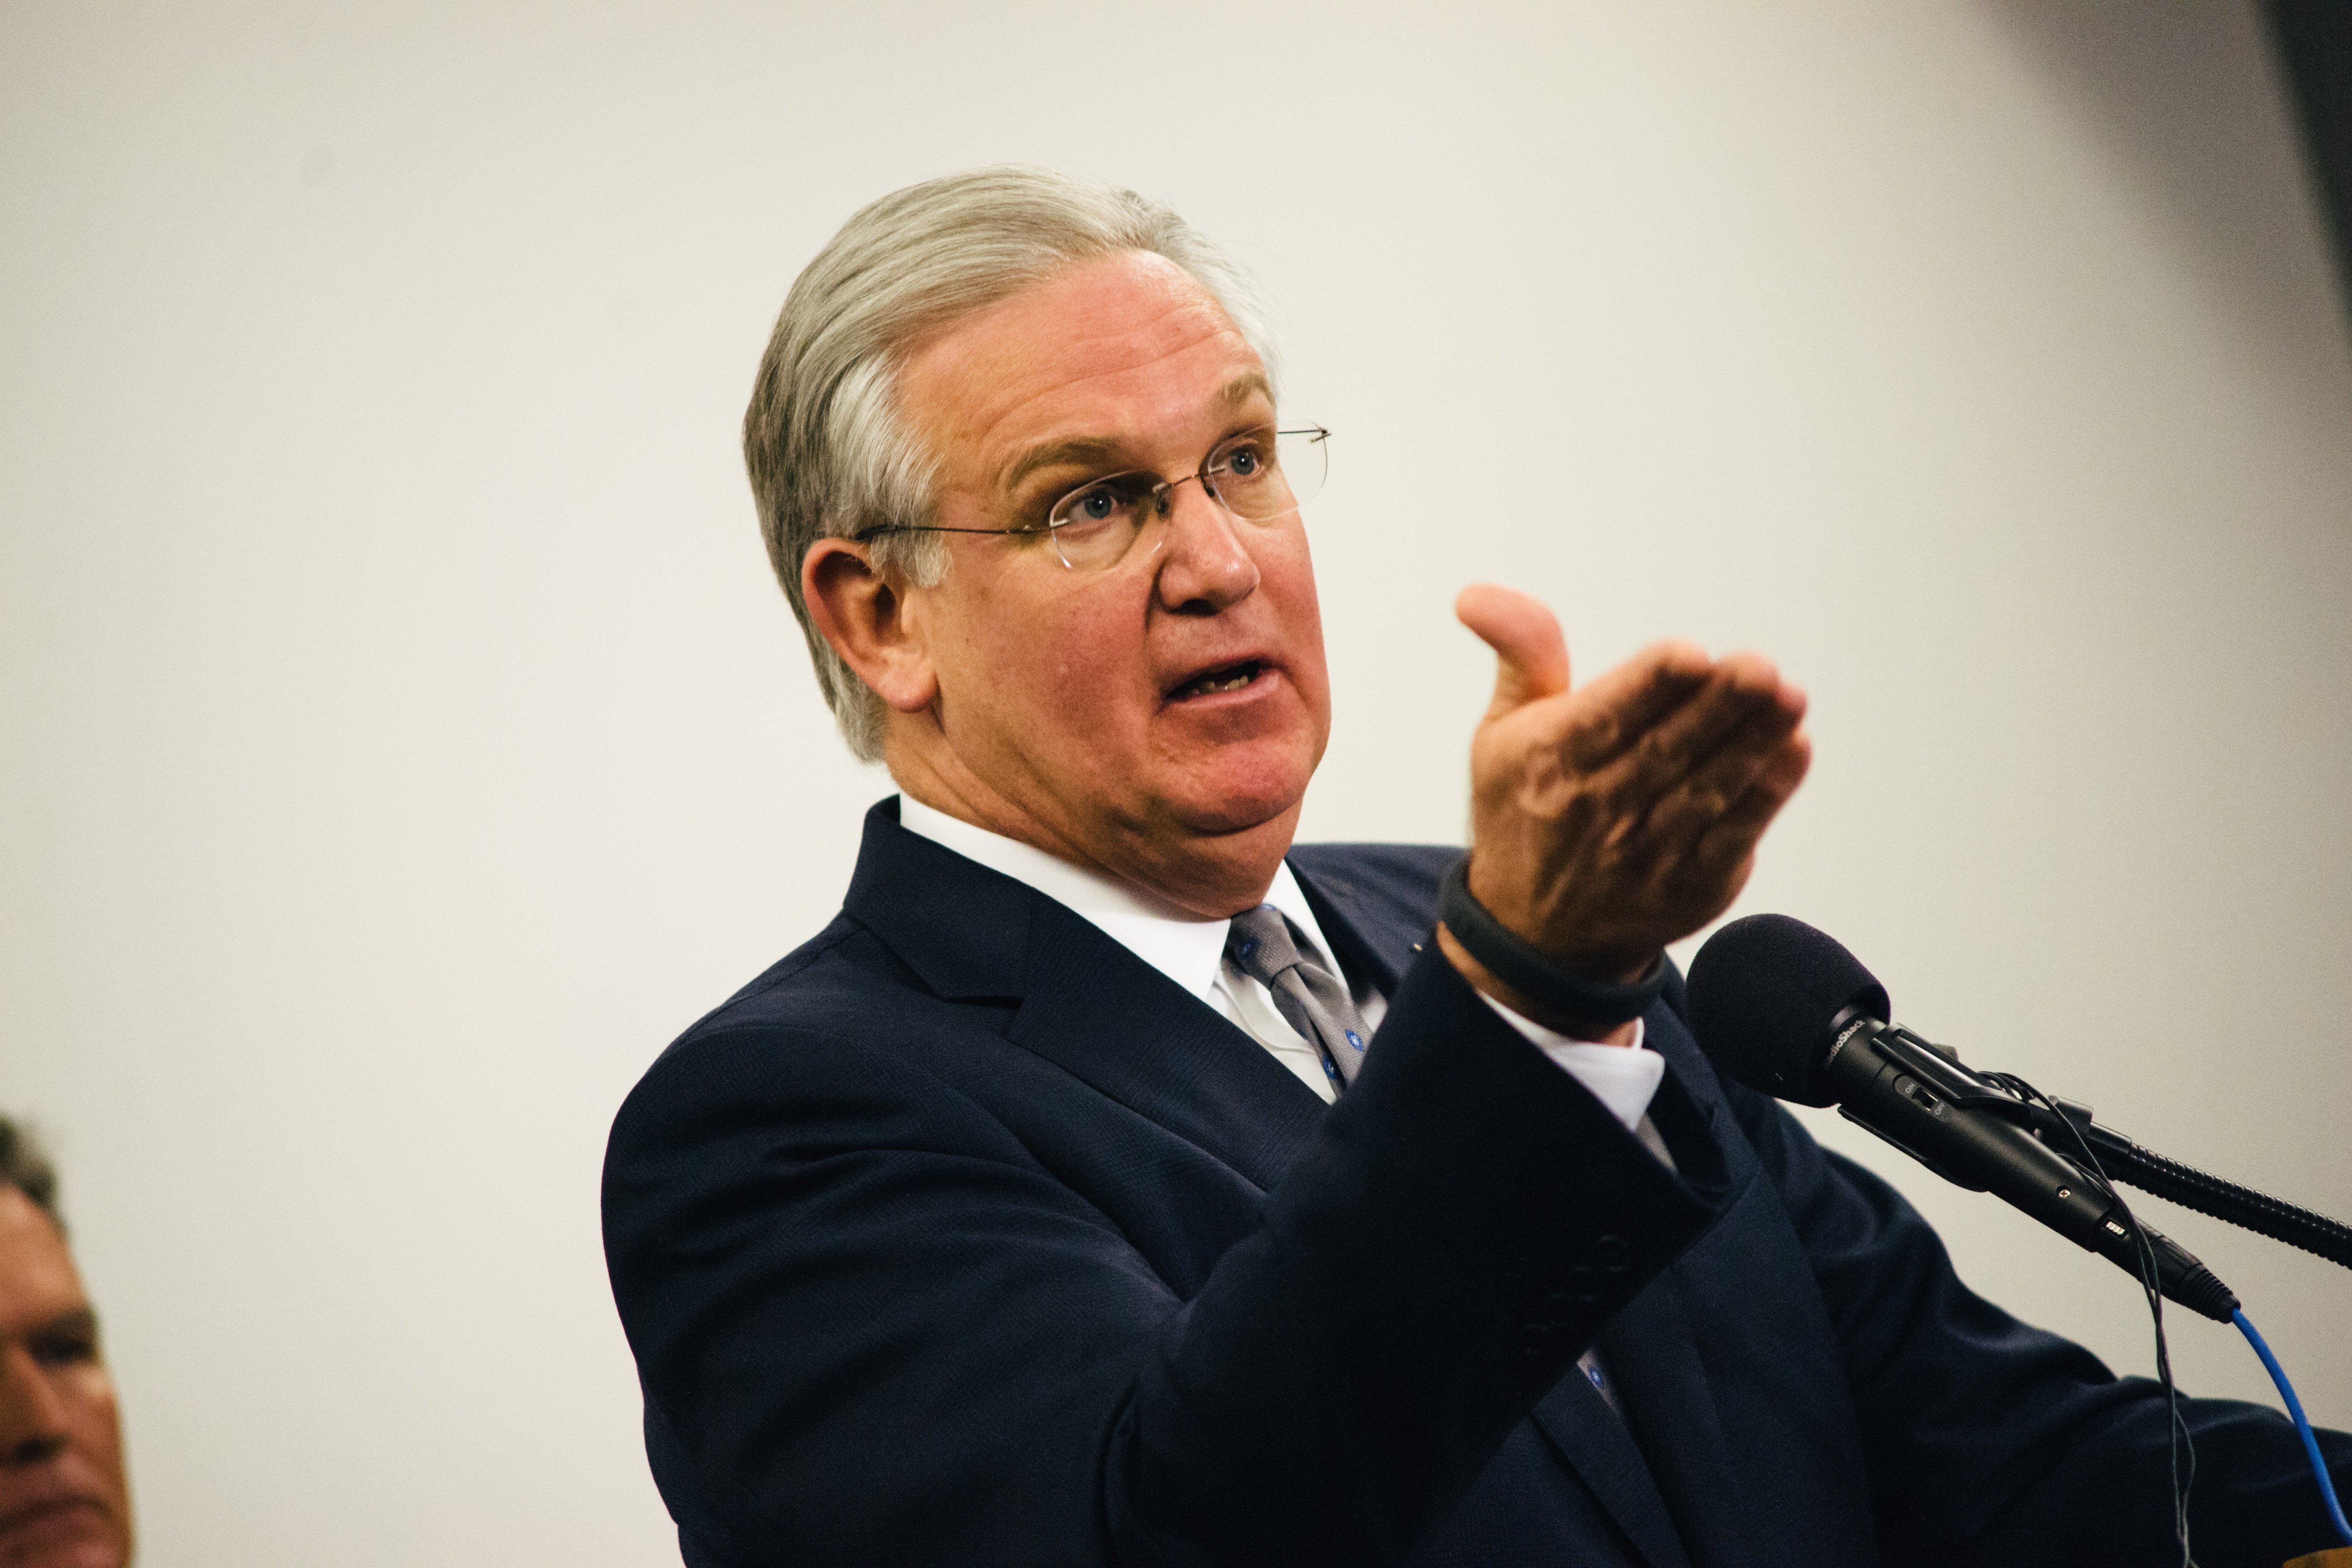 At a Nov. 11 press conference, Missouri Governor Jay Nixon said the National Guard could again be deployed to deal with violence in Ferguson. (Bryan Sutter—Demotix/Corbis)